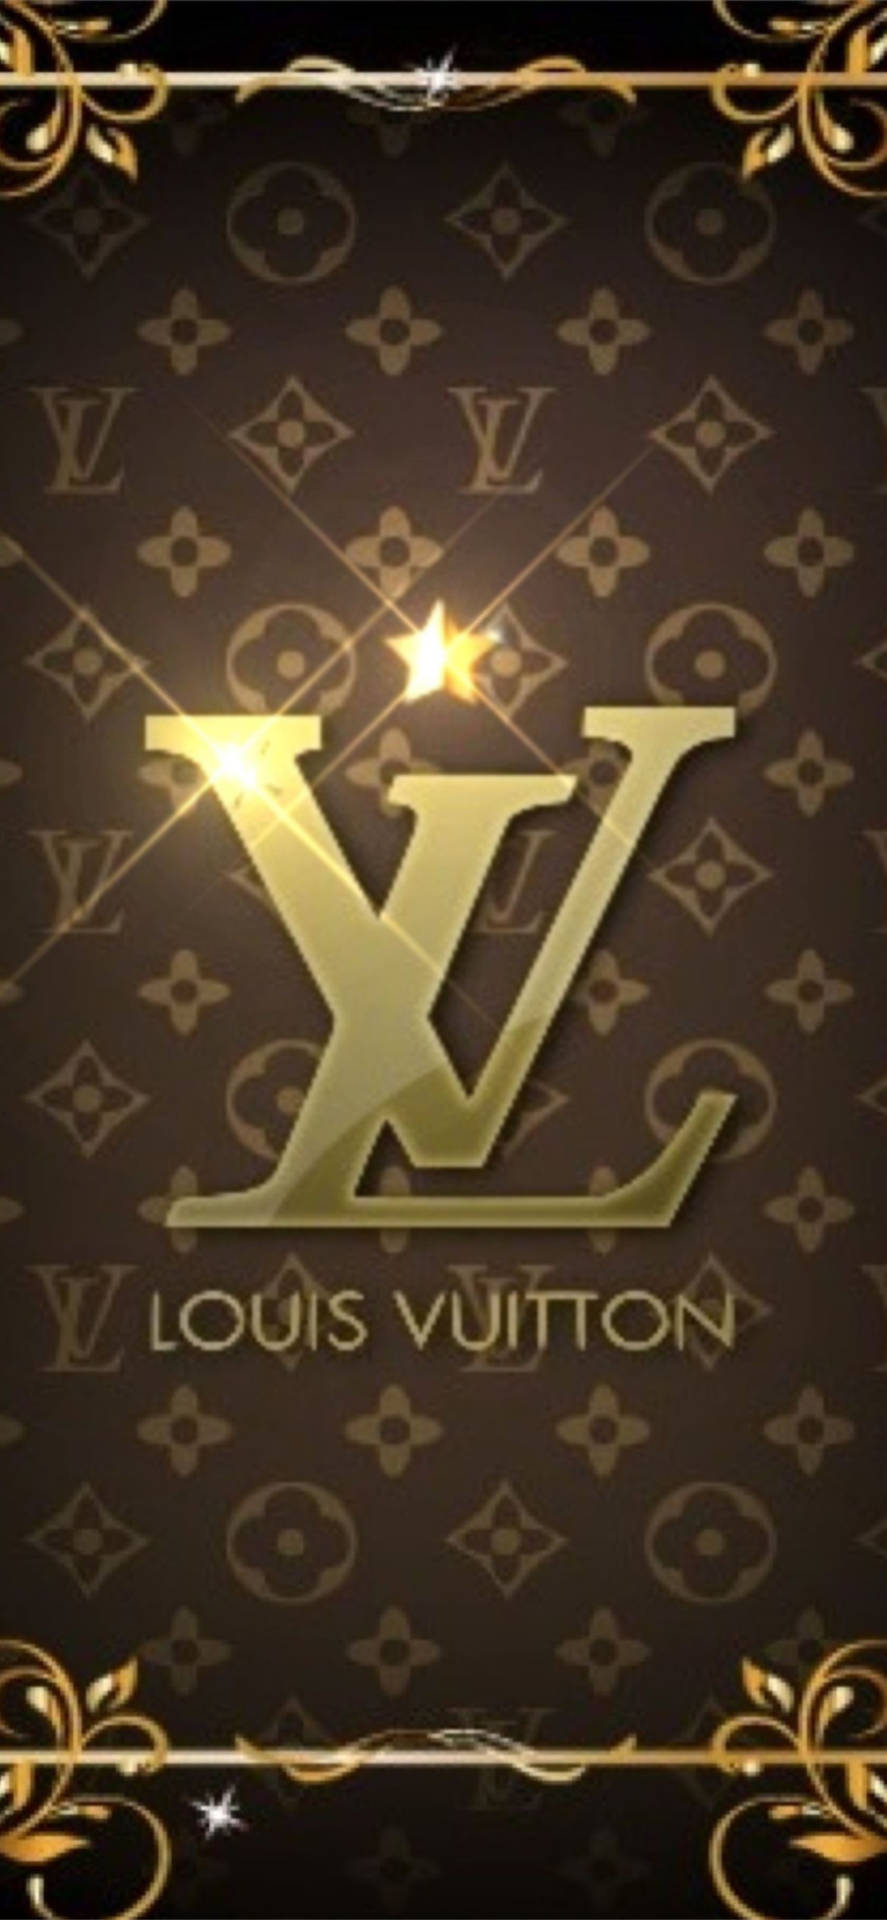 Brown And Gold Louis Vuitton Phone Wallpaper